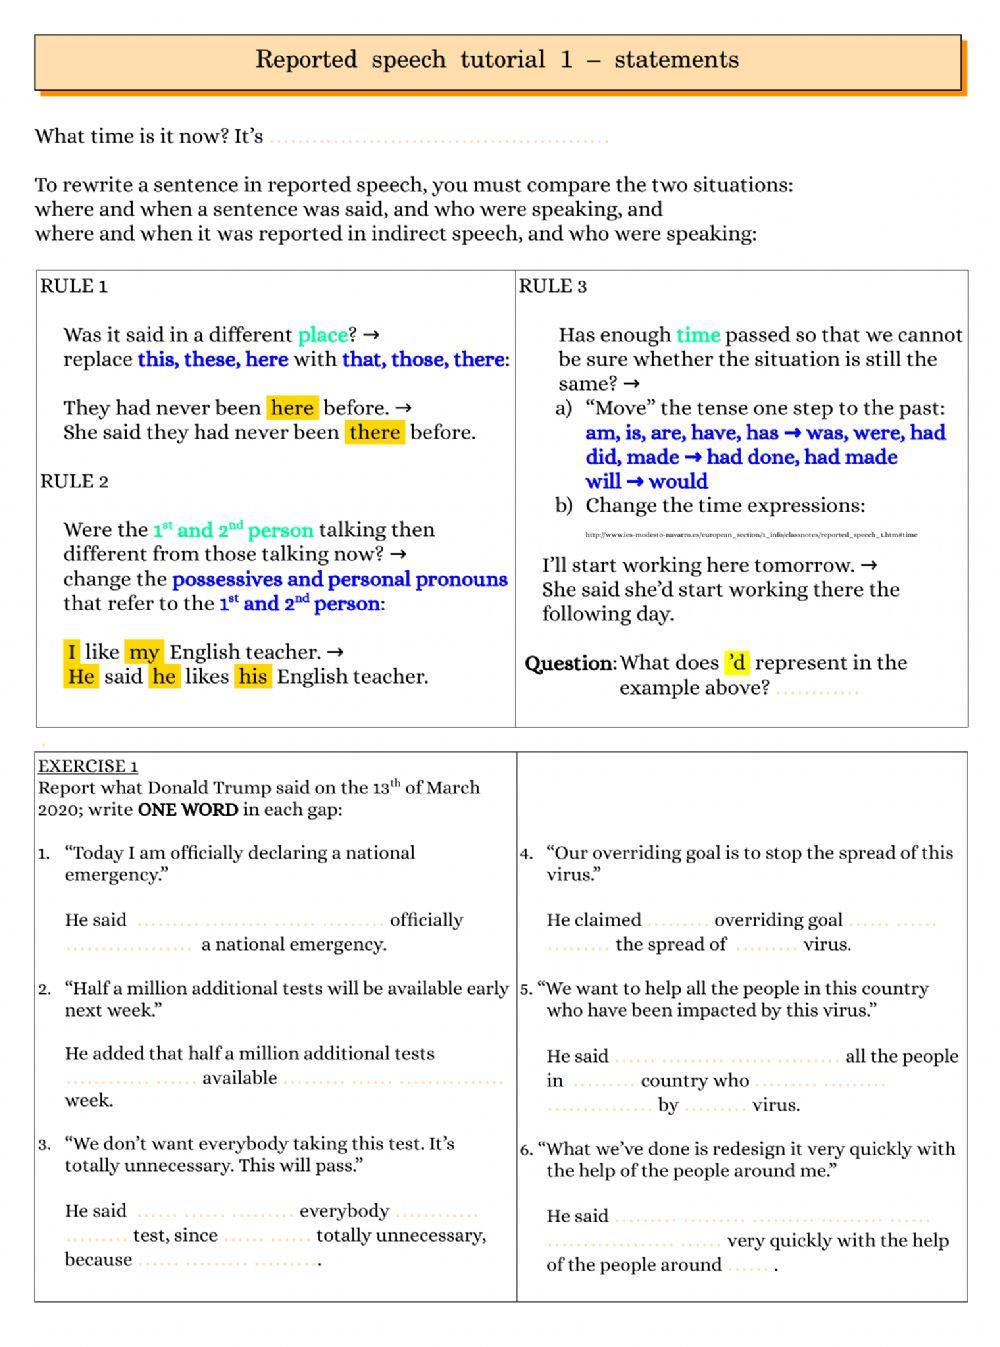 Reported speech theory & easy practice - statements